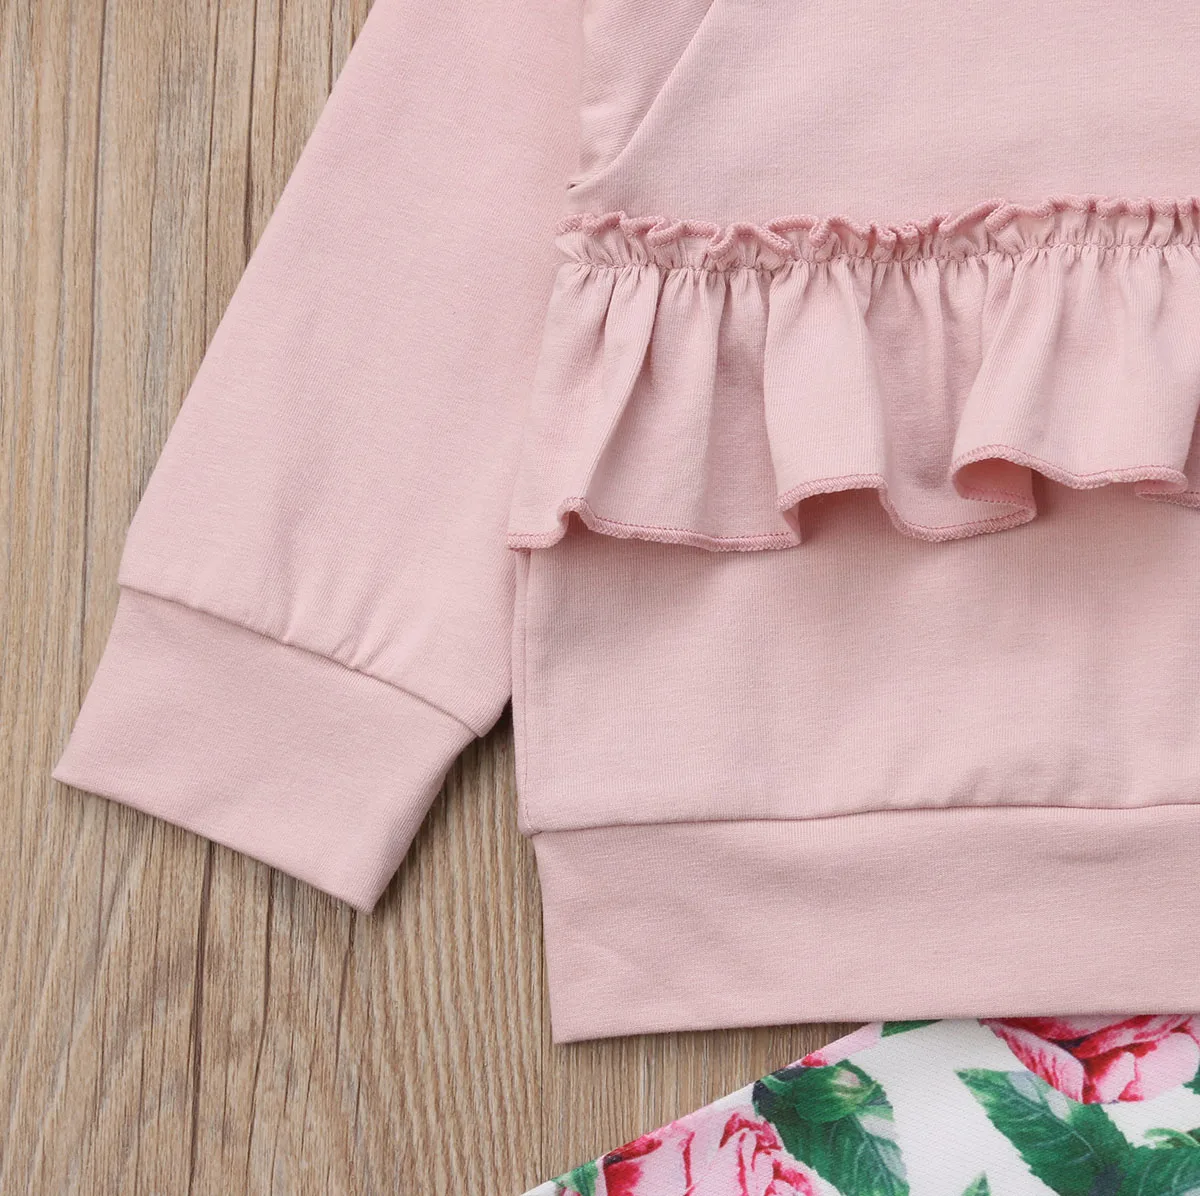 Autumn NEW Kids Infant Newborn Baby Girl Long Sleeve Ruffle Edge Cotton T-shirt Tops Flower Pants Casual Outfit Set Clothes